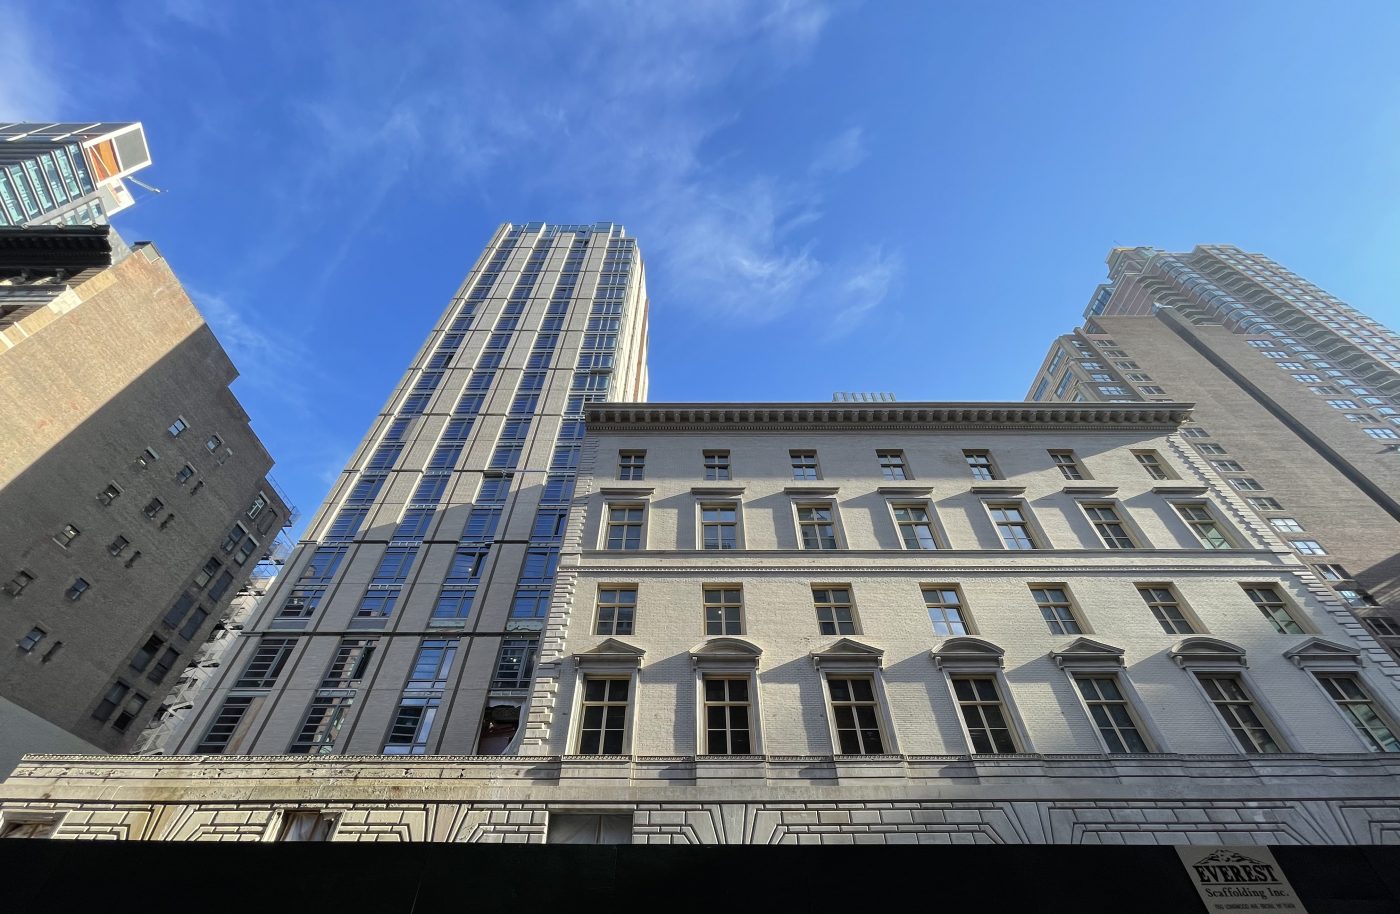 Fifth Avenue Hotel Progresses at 250 Fifth Avenue in NoMad, Manhattan - New  York YIMBY